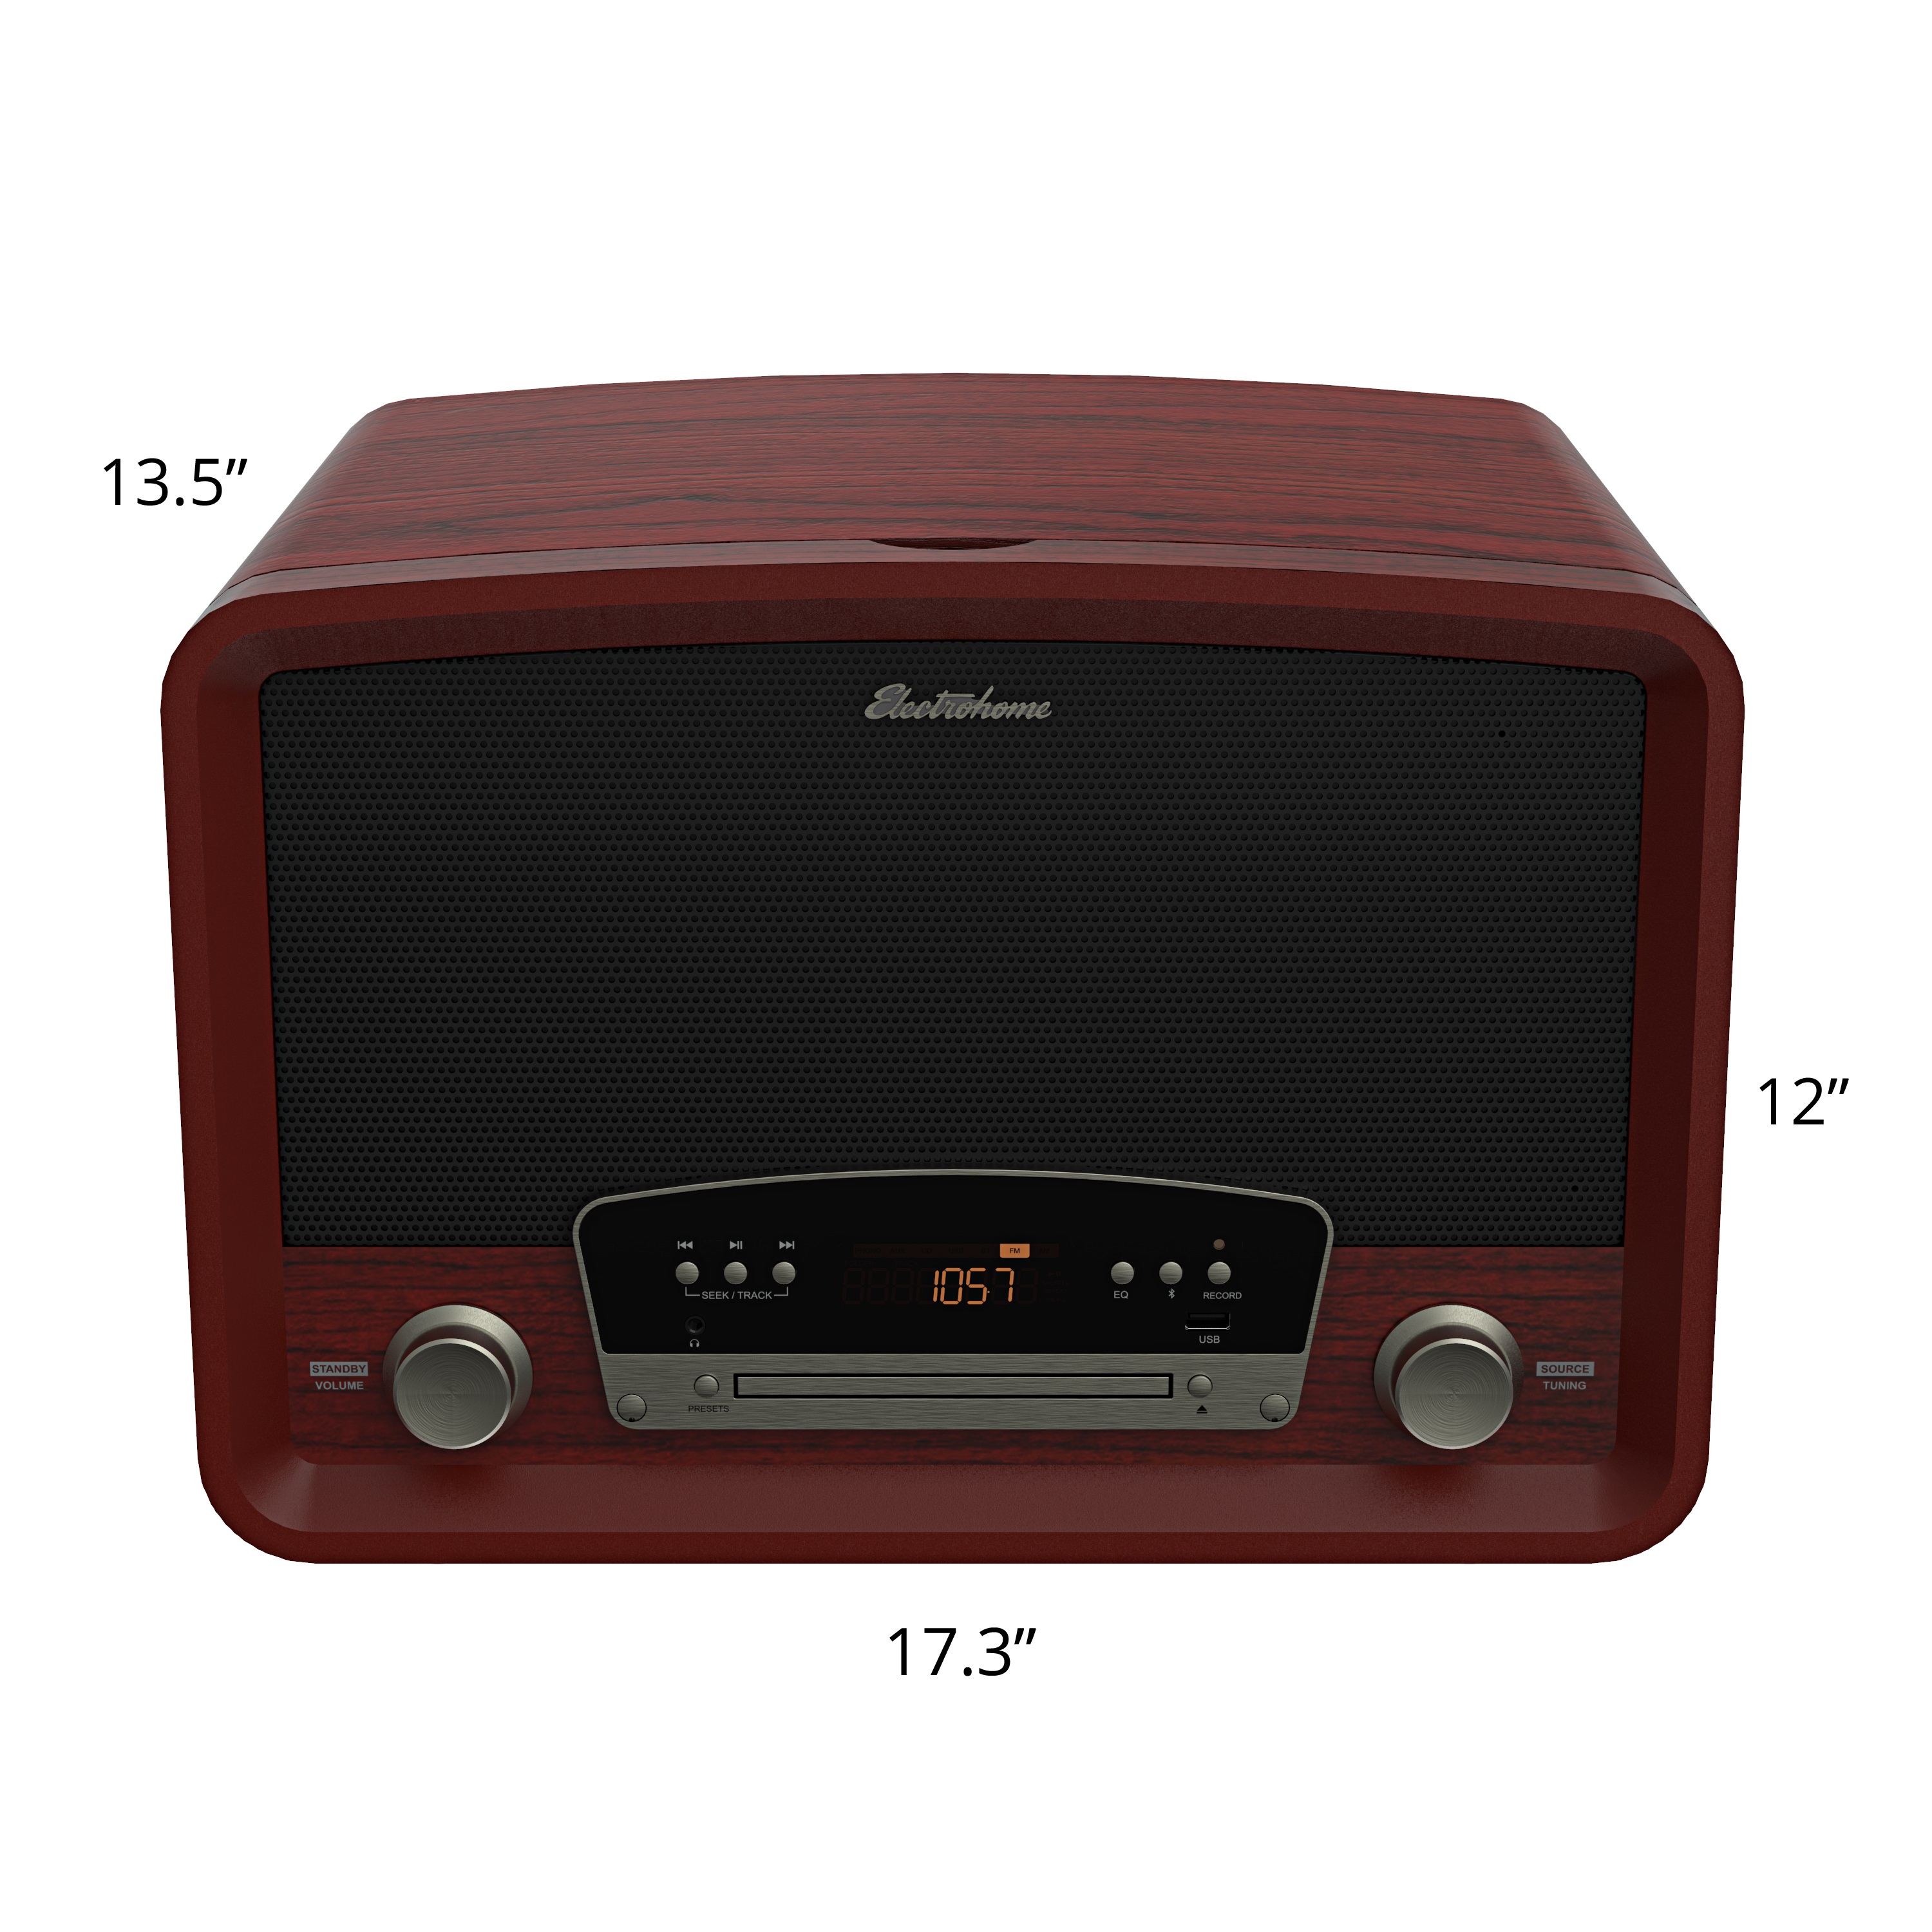 Electrohome Vinyl Record Player - 1 Year Extended Warranty - image 4 of 6